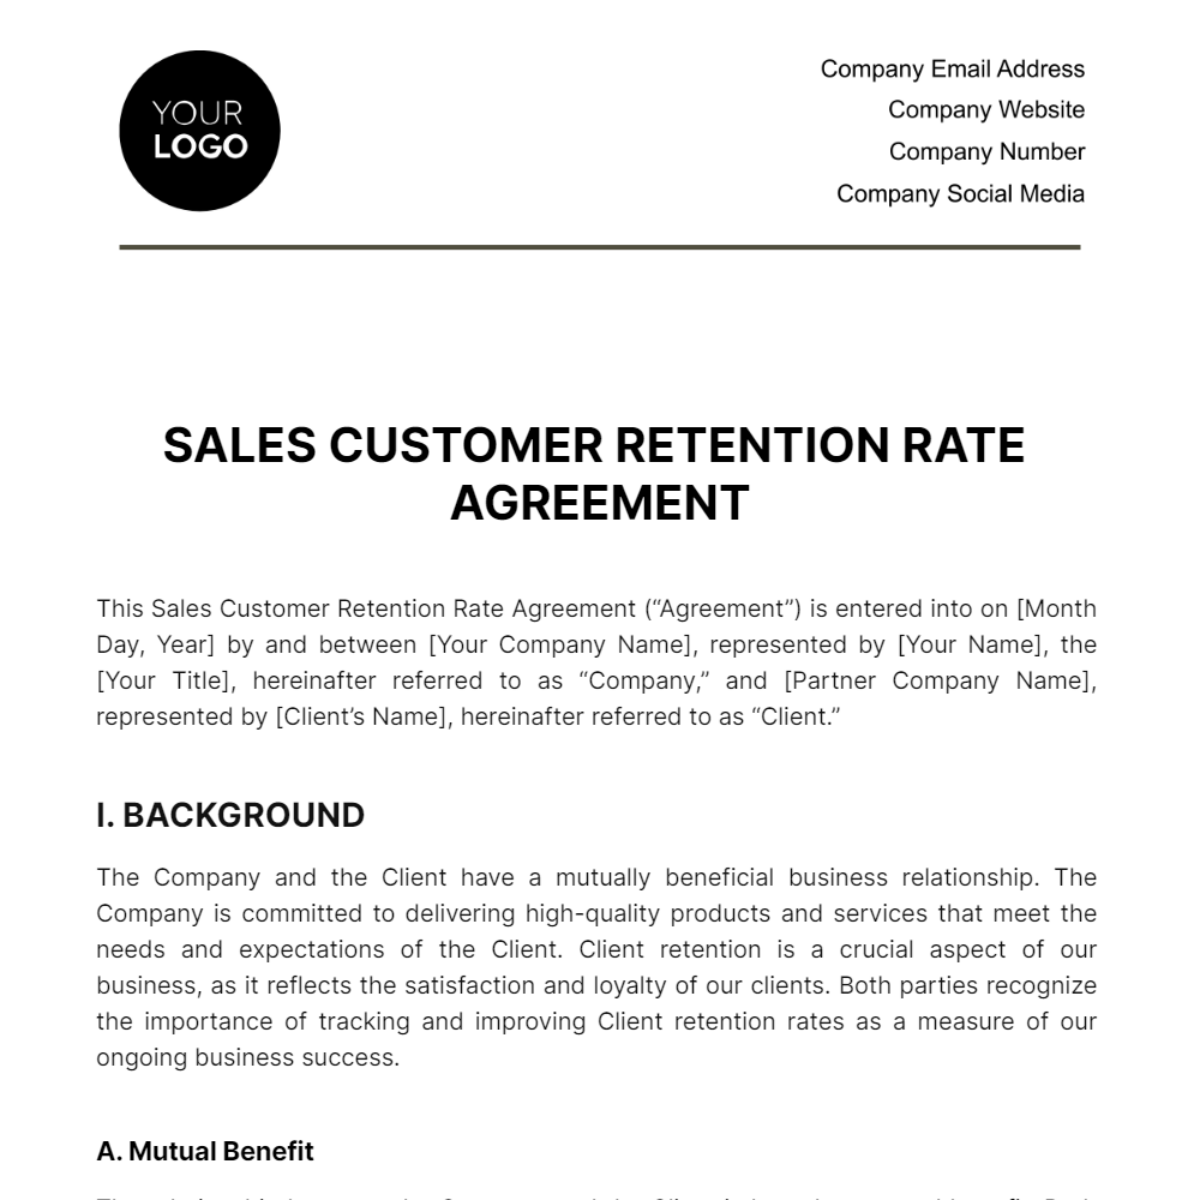 Free Sales Customer Retention Rate Agreement Template